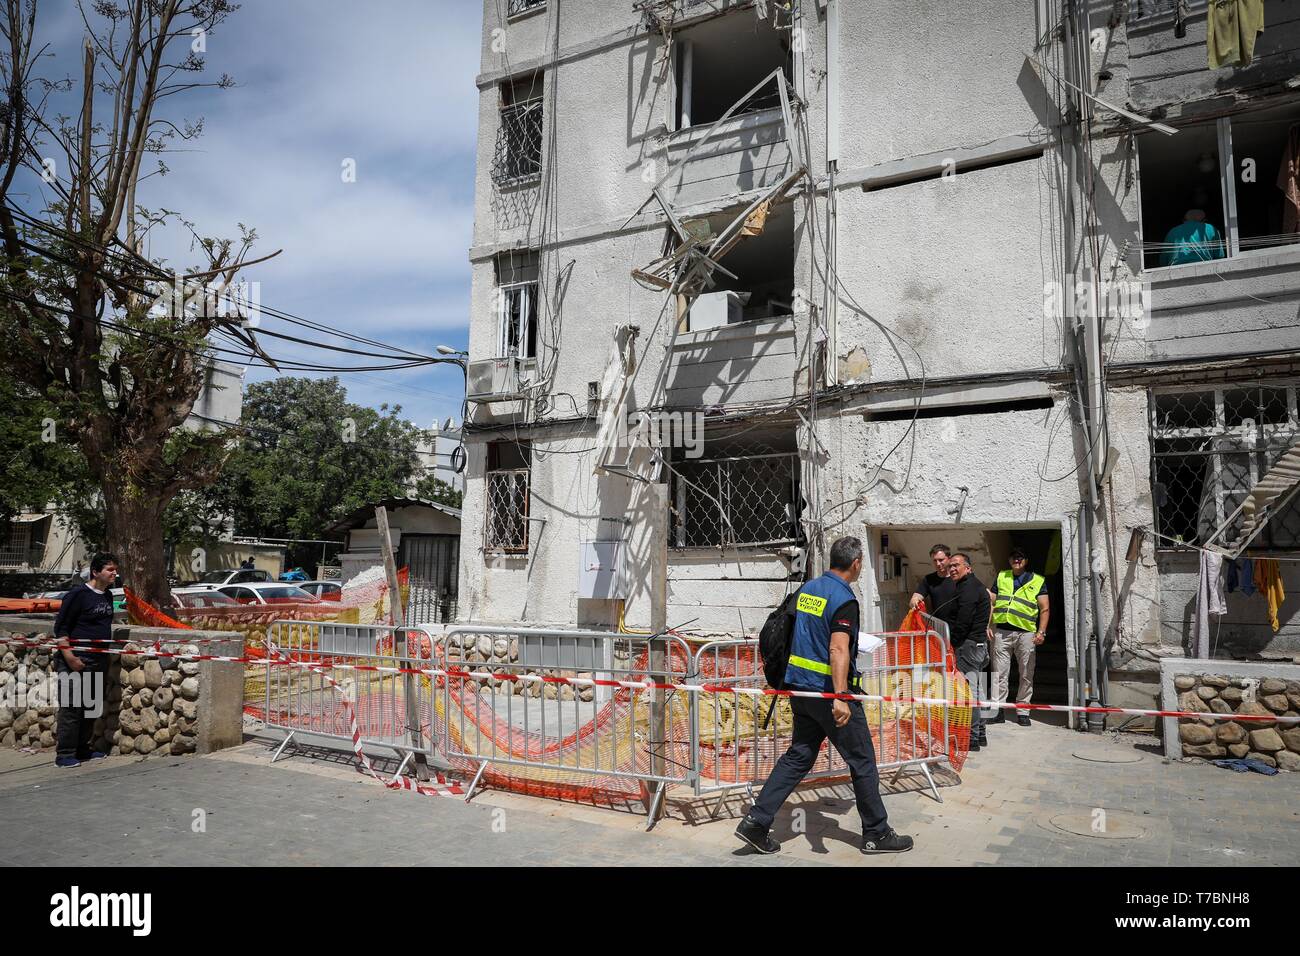 Jerusalem, Israel. 5th May, 2019. A building is seen damaged by a rocket fired from the Gaza Strip in Ashkelon, Israel, May 5, 2019. Four Israeli civilians were killed on Sunday and more than 70 injured by rockets fired by the Palestinians from the Gaza Strip. Credit: JINI/Xinhua/Alamy Live News Stock Photo